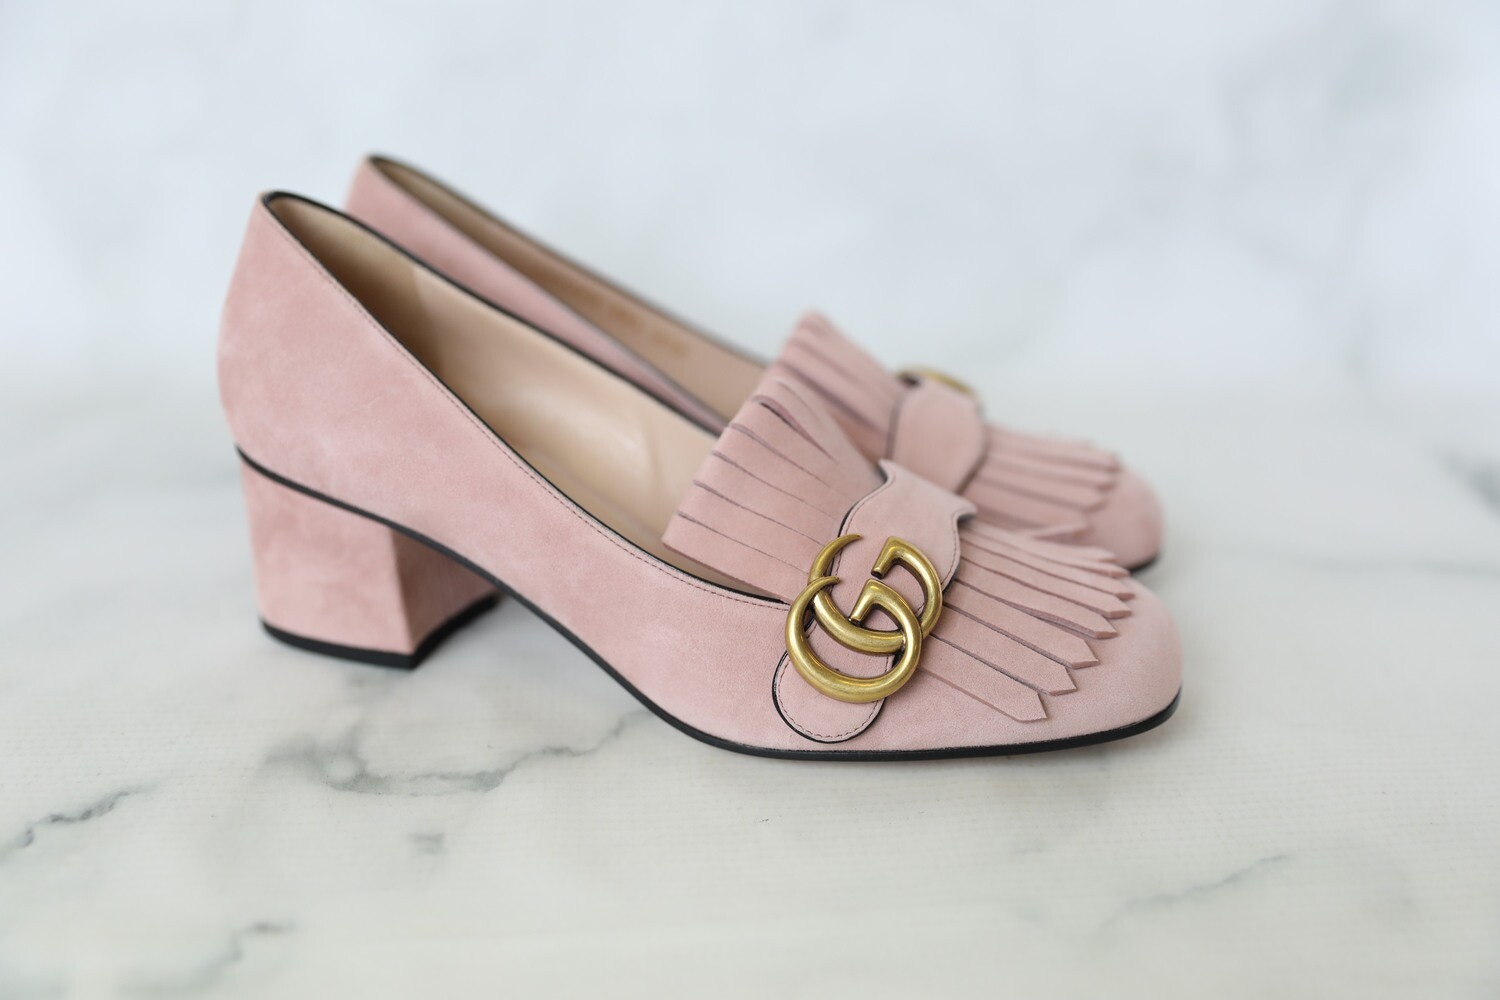 Gucci Shoes Marmont Loafer Pumps, Pink Suede, Size 38.5, New in Box WA001